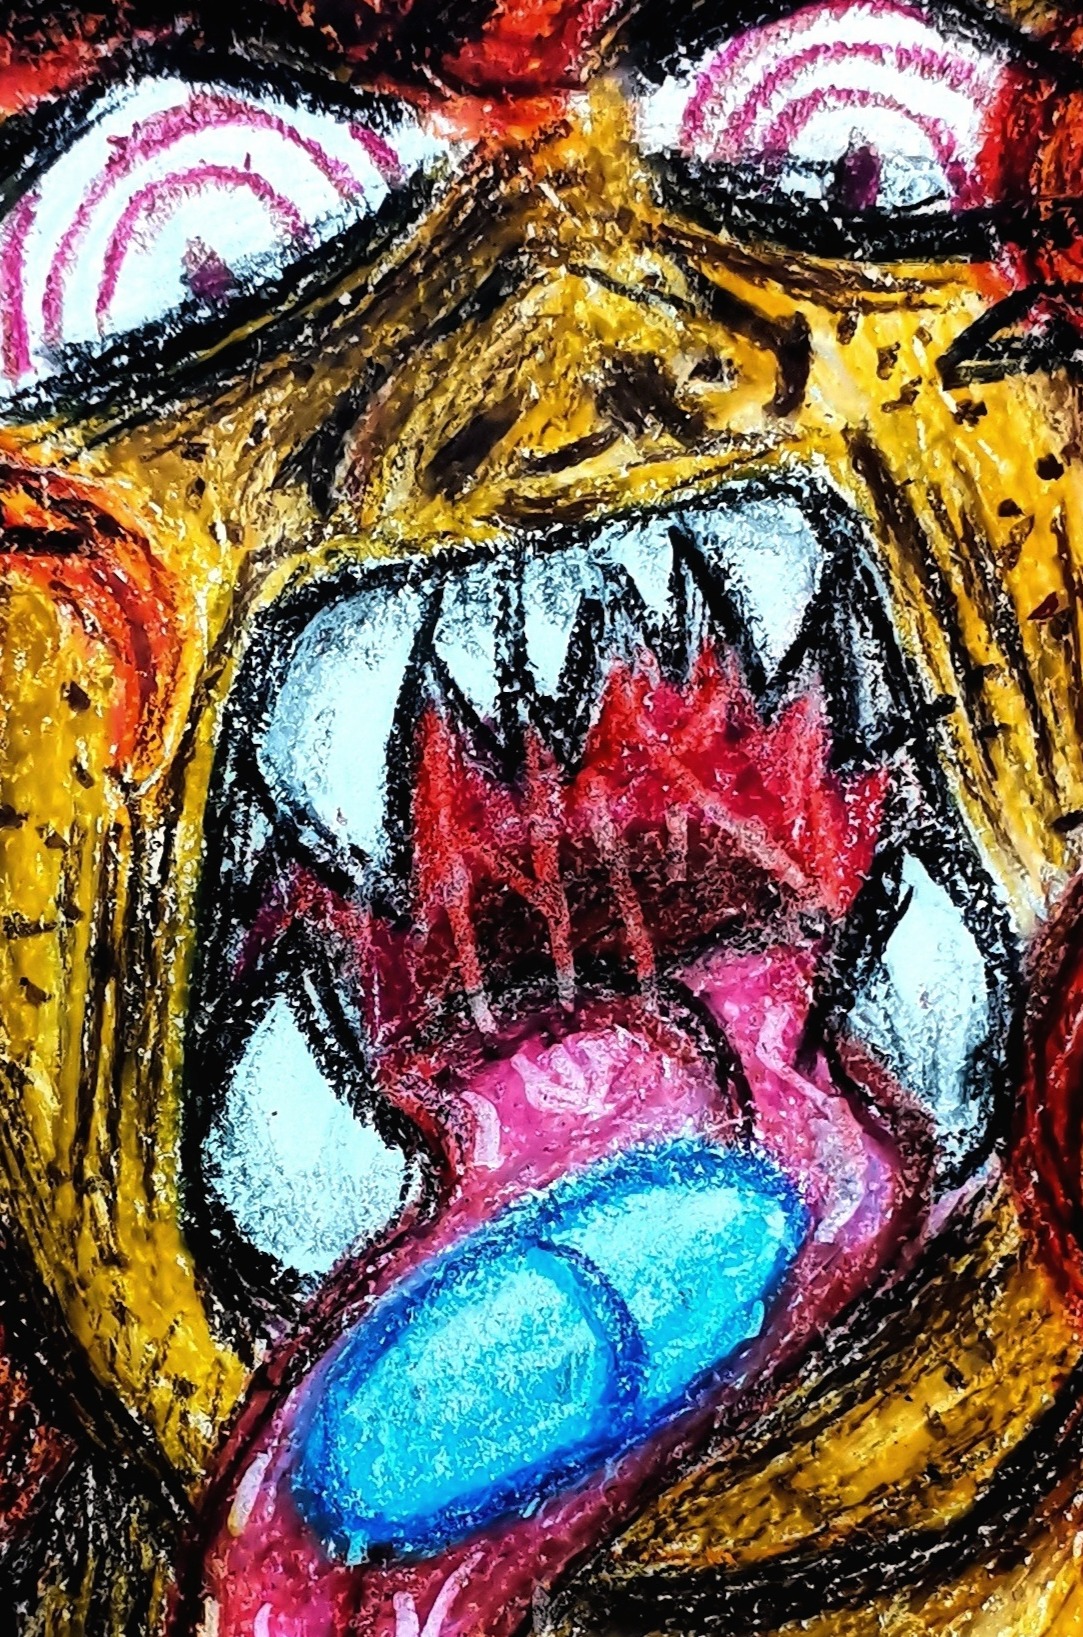 Oil pastel drawing of Jones with his mouth wide open and tounge hanging out. A blue pill rests on his tounge.